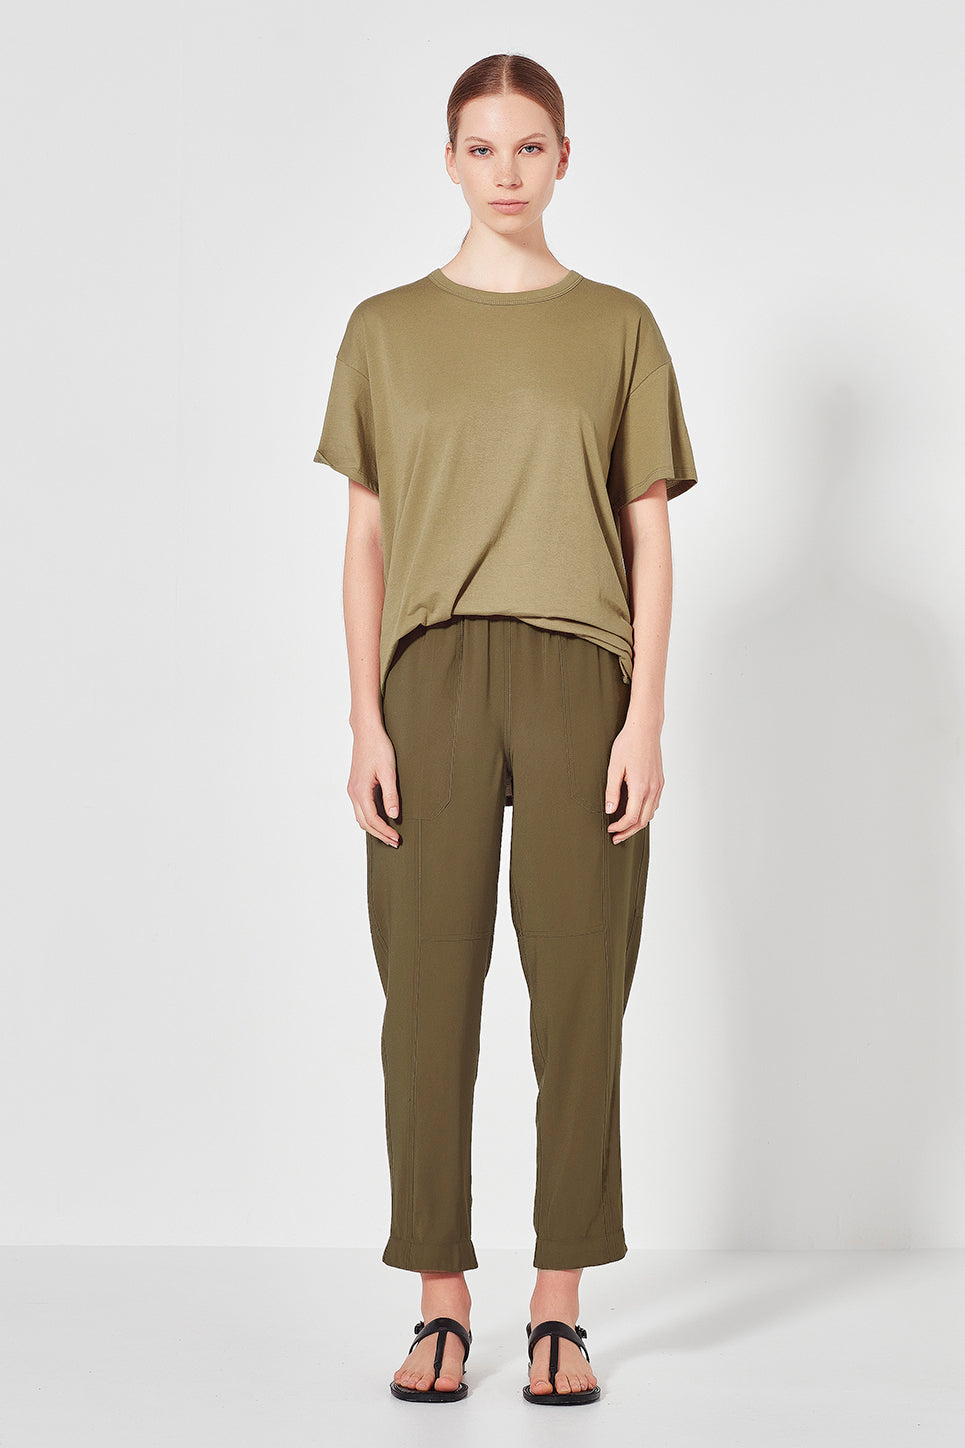 The Kingston Tee in Military